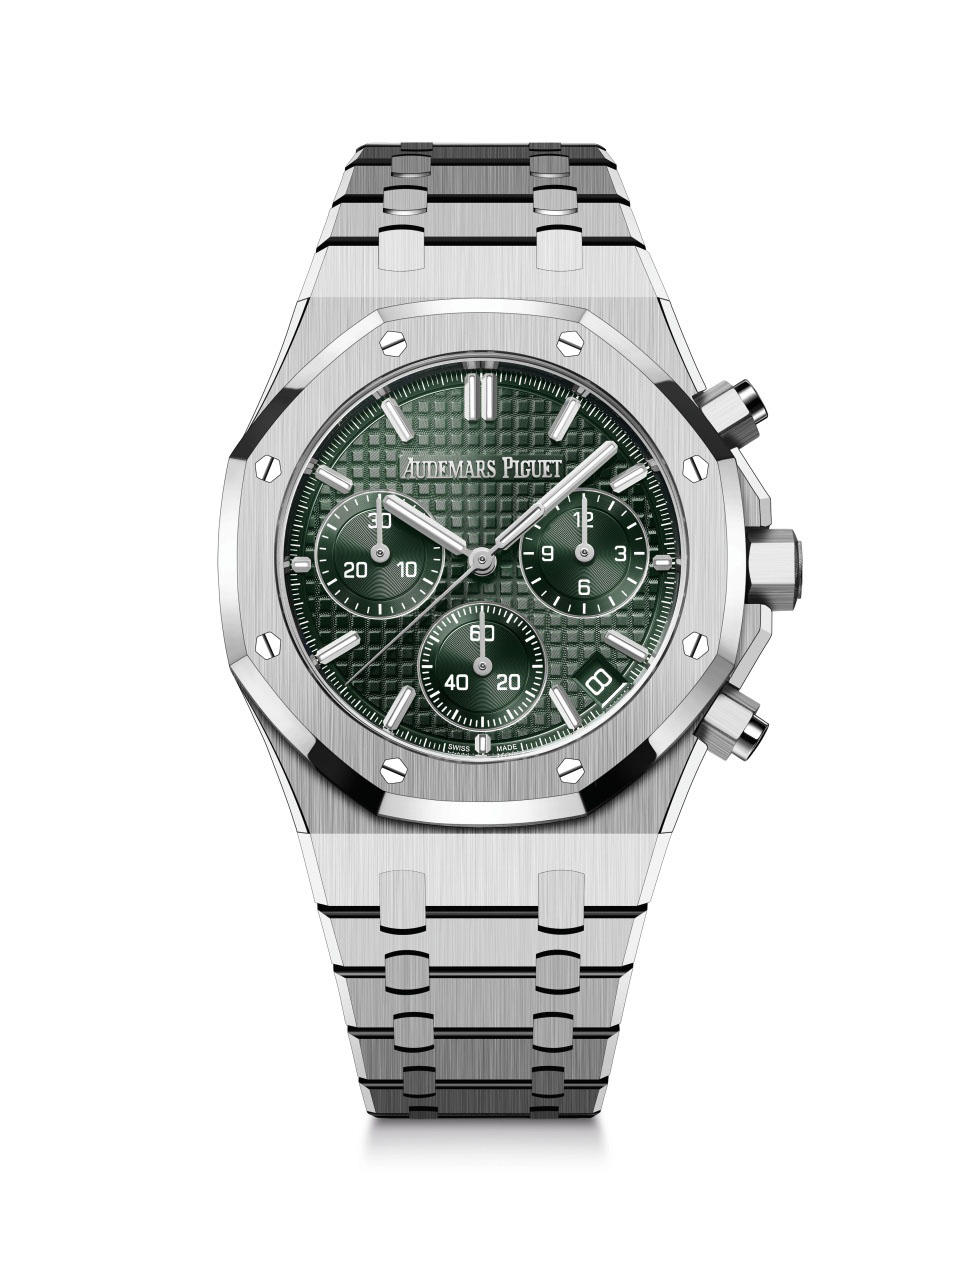 Royal Oak Selfwinding Chronograph / 41mm; stainless steel case with khaki green dial (26240ST.OO.1320ST.04)